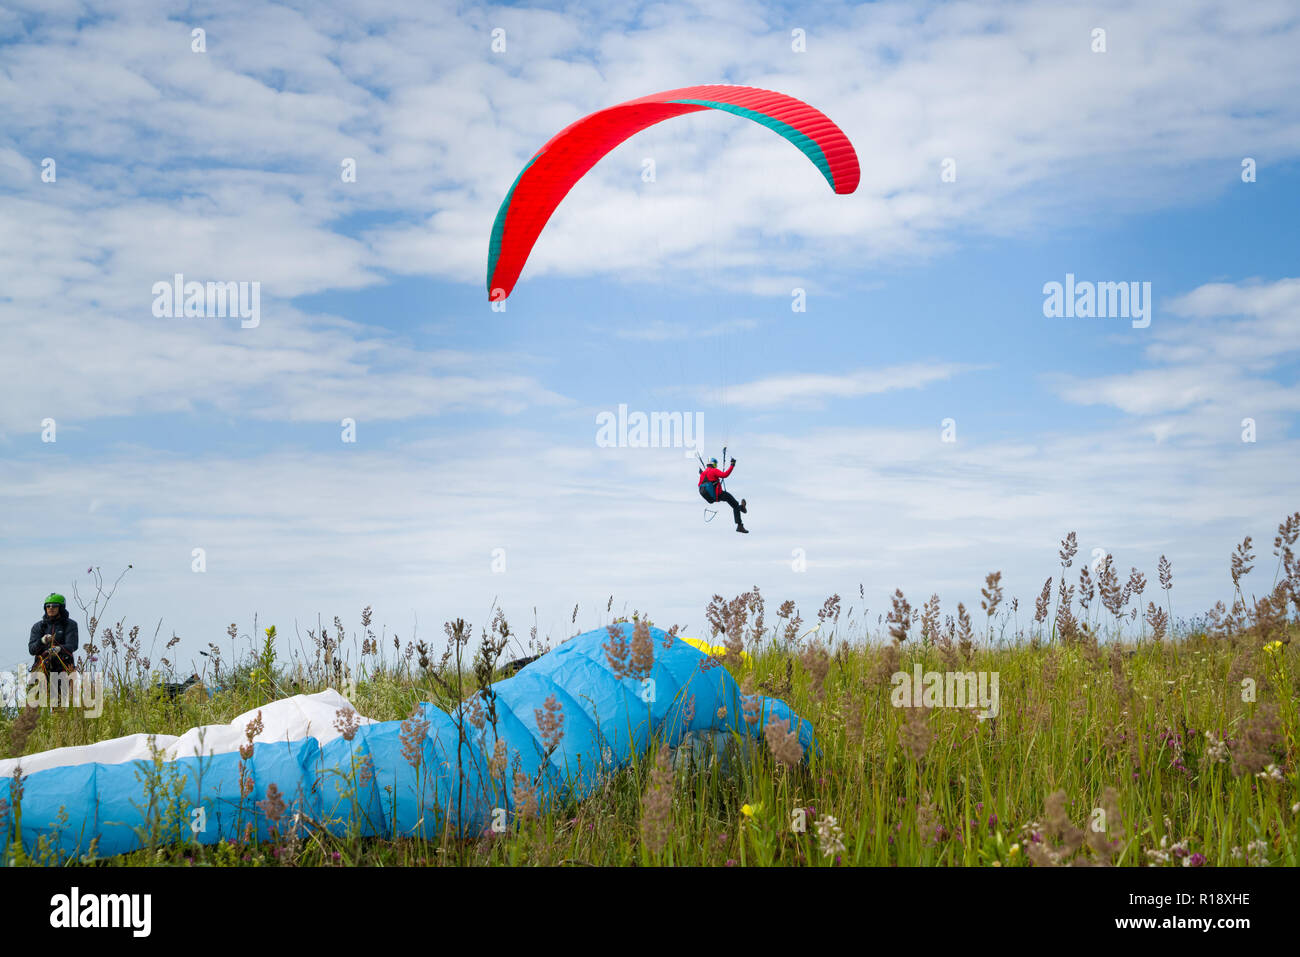 Paragliding in dynamic wind along the dunes in the beach Stock Photo